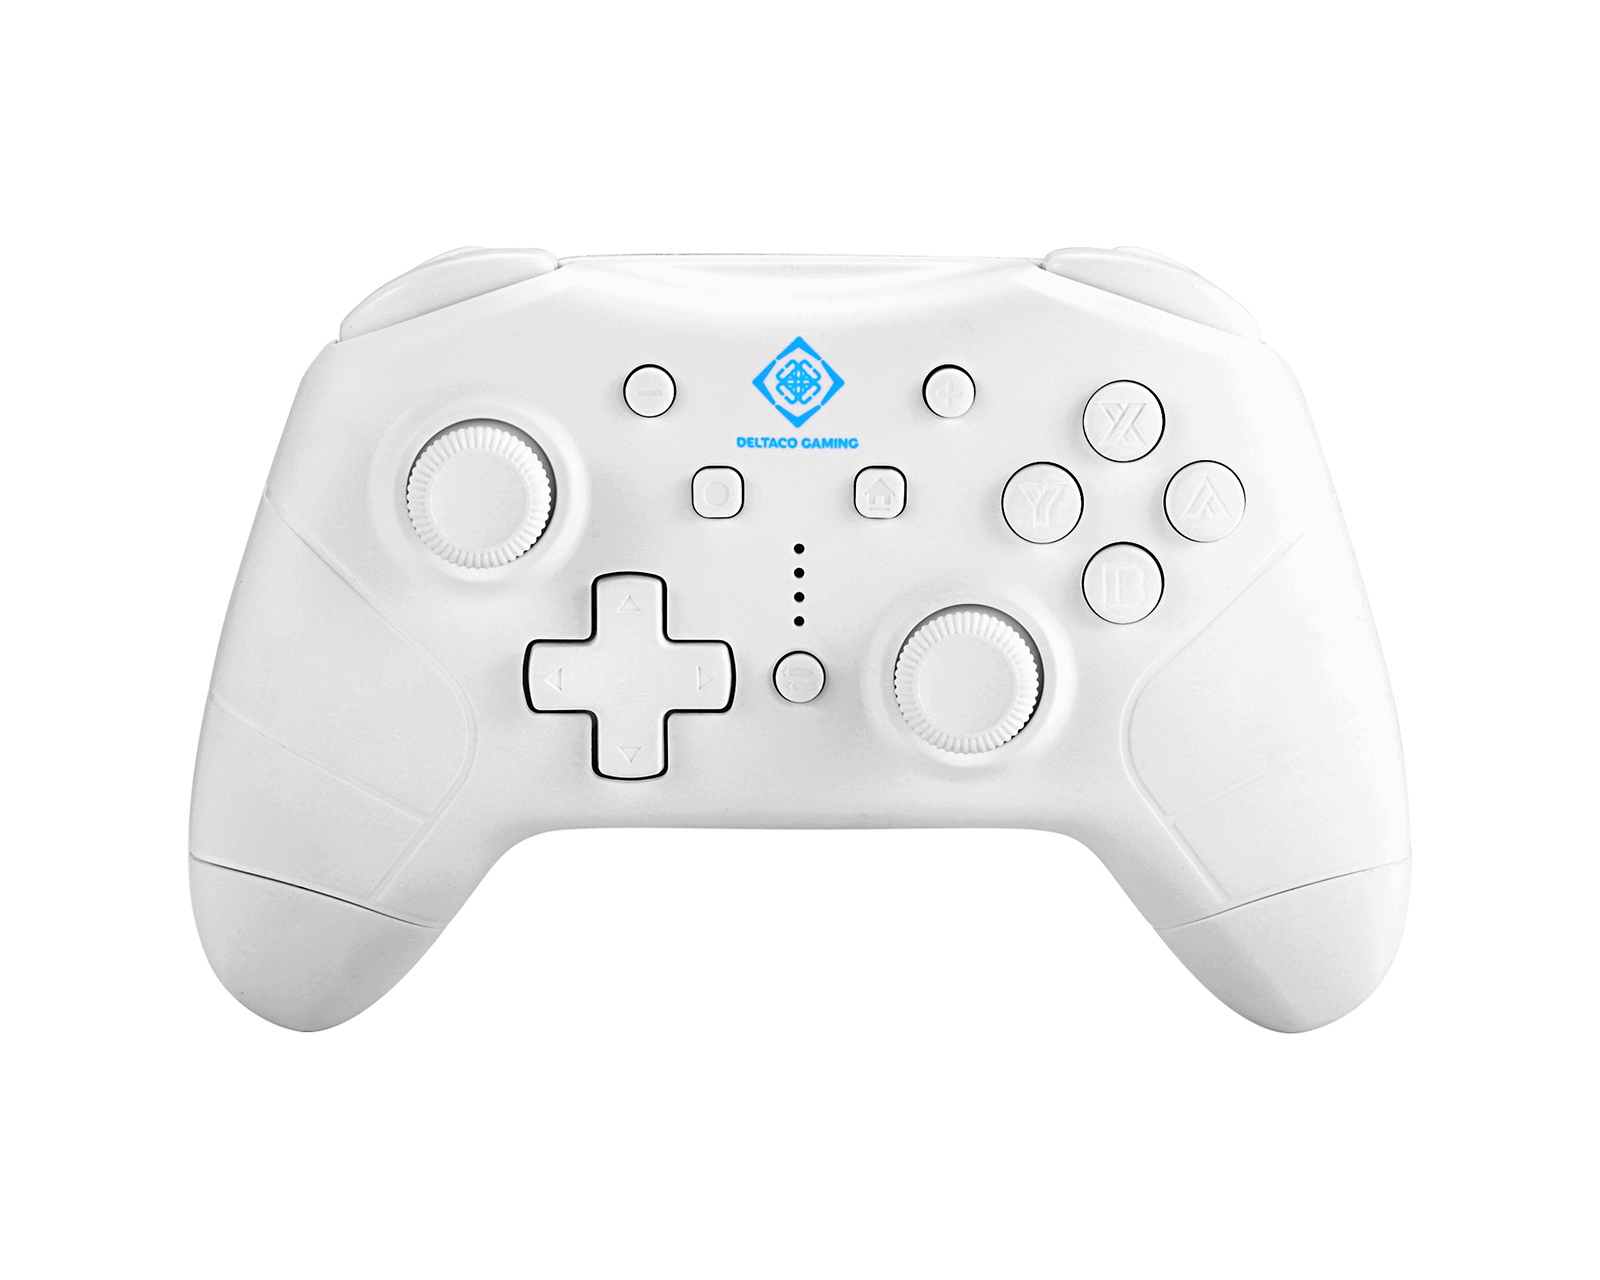 Deltaco Gaming Wireless Controller Trådløs Controller til Nintendo Switch/ PC/Android - Hvid - MaxGaming.dk